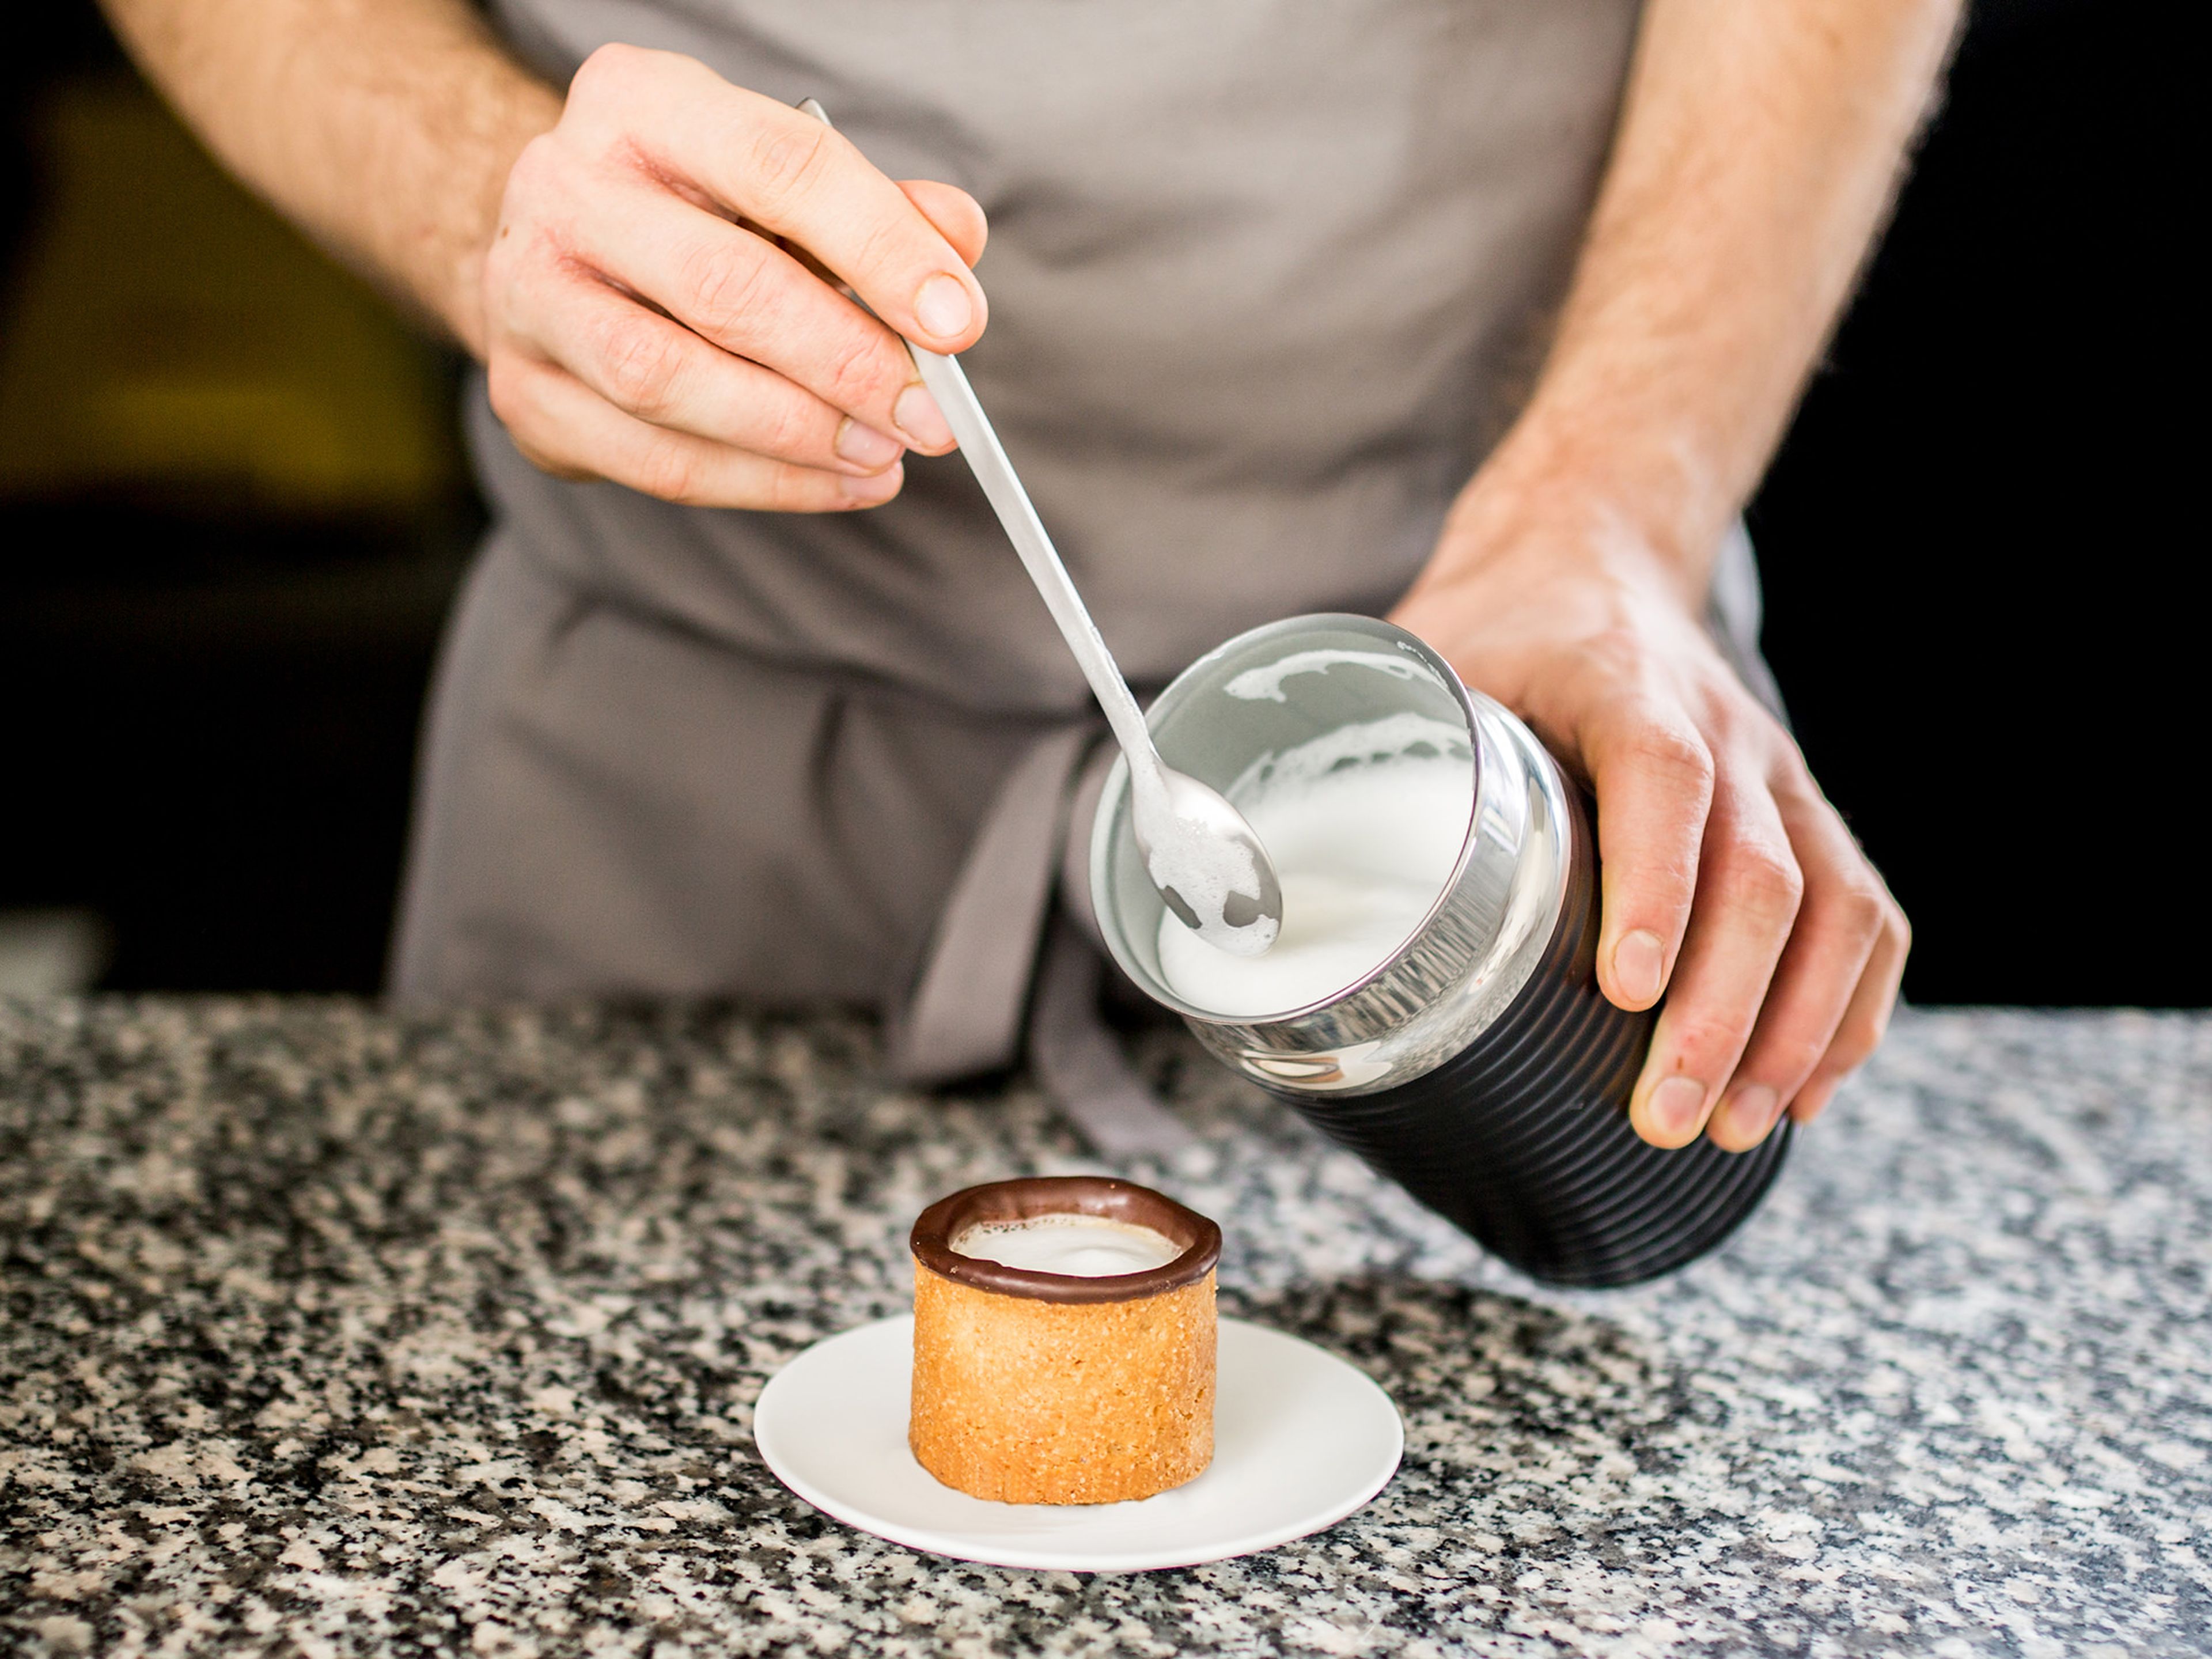 Once chocolate has set, the cups are ready to be filled with espresso. If you like, top the espresso with milk foam. Enjoy!